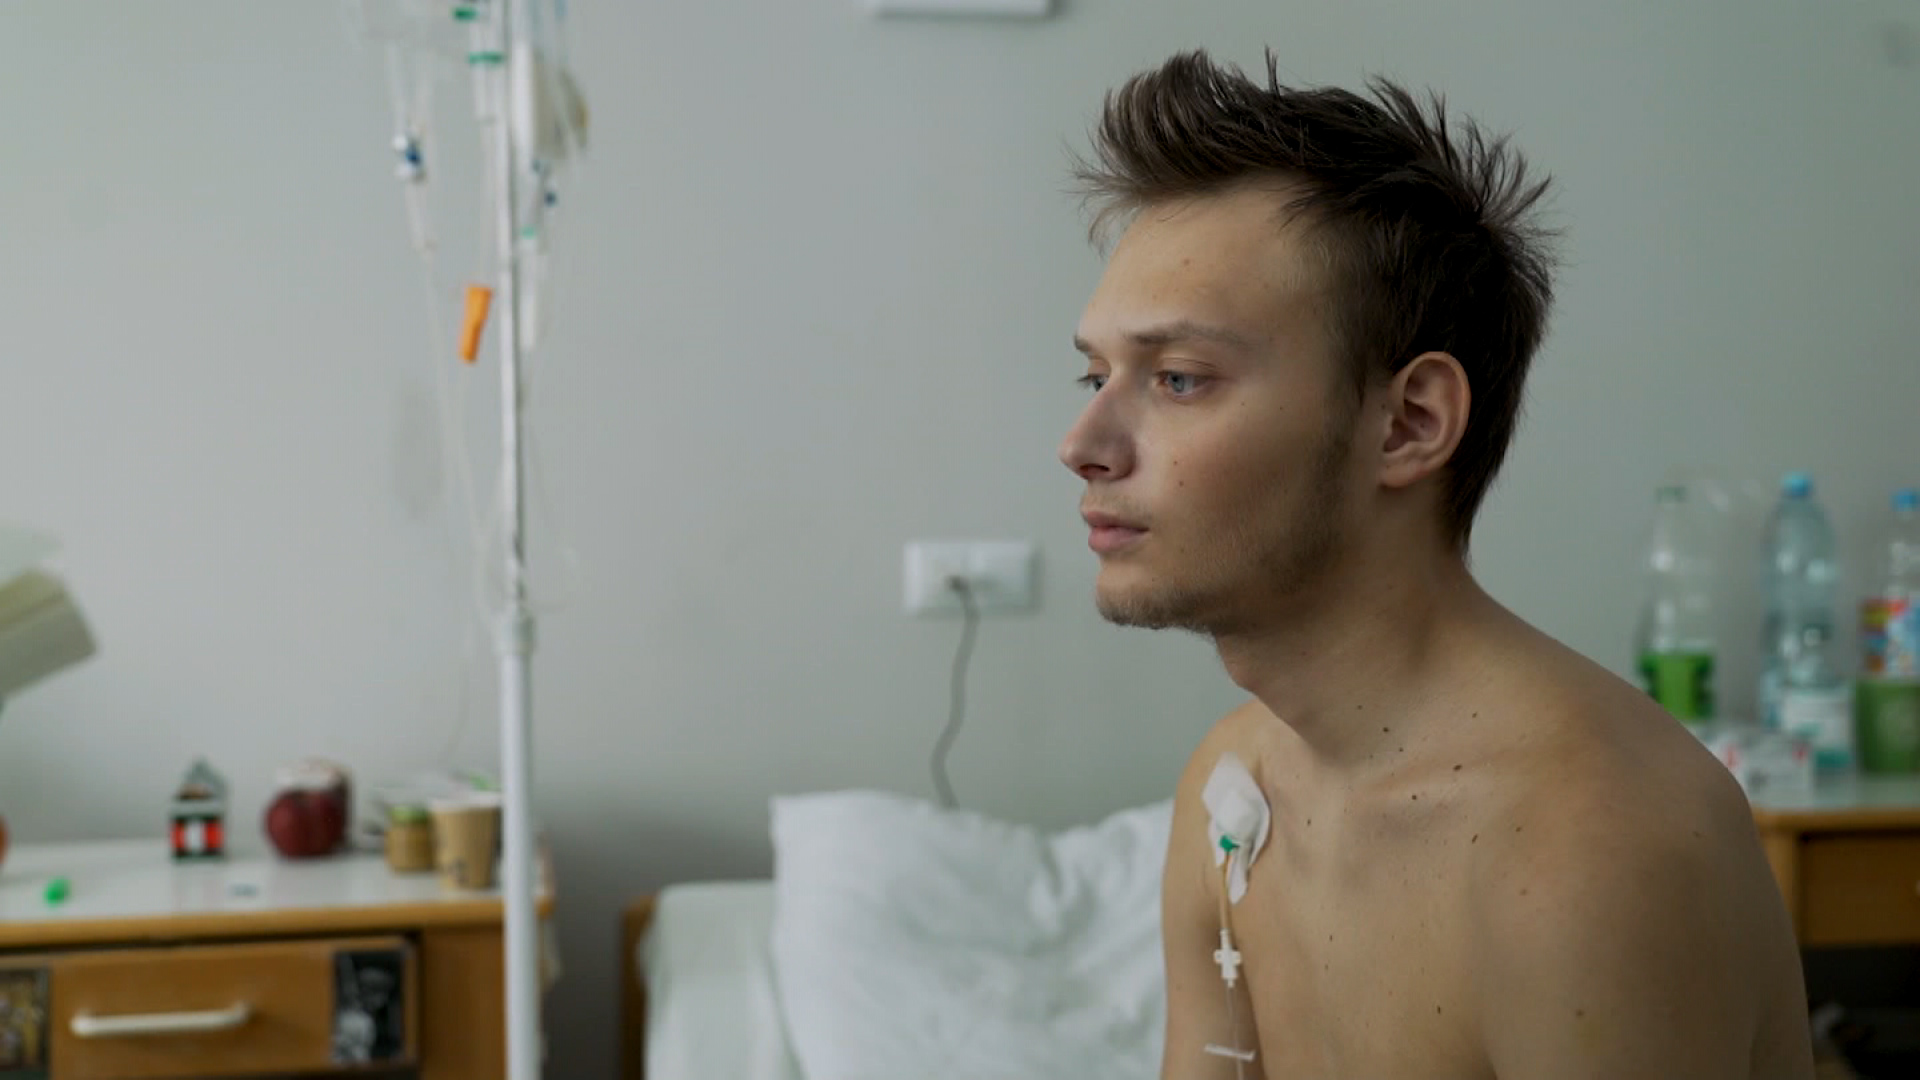 Dmytro Kaliuzhnyi, 19, is slowly recovering from injuries sustained outside his home in Kharkiv, northeastern Ukraine.